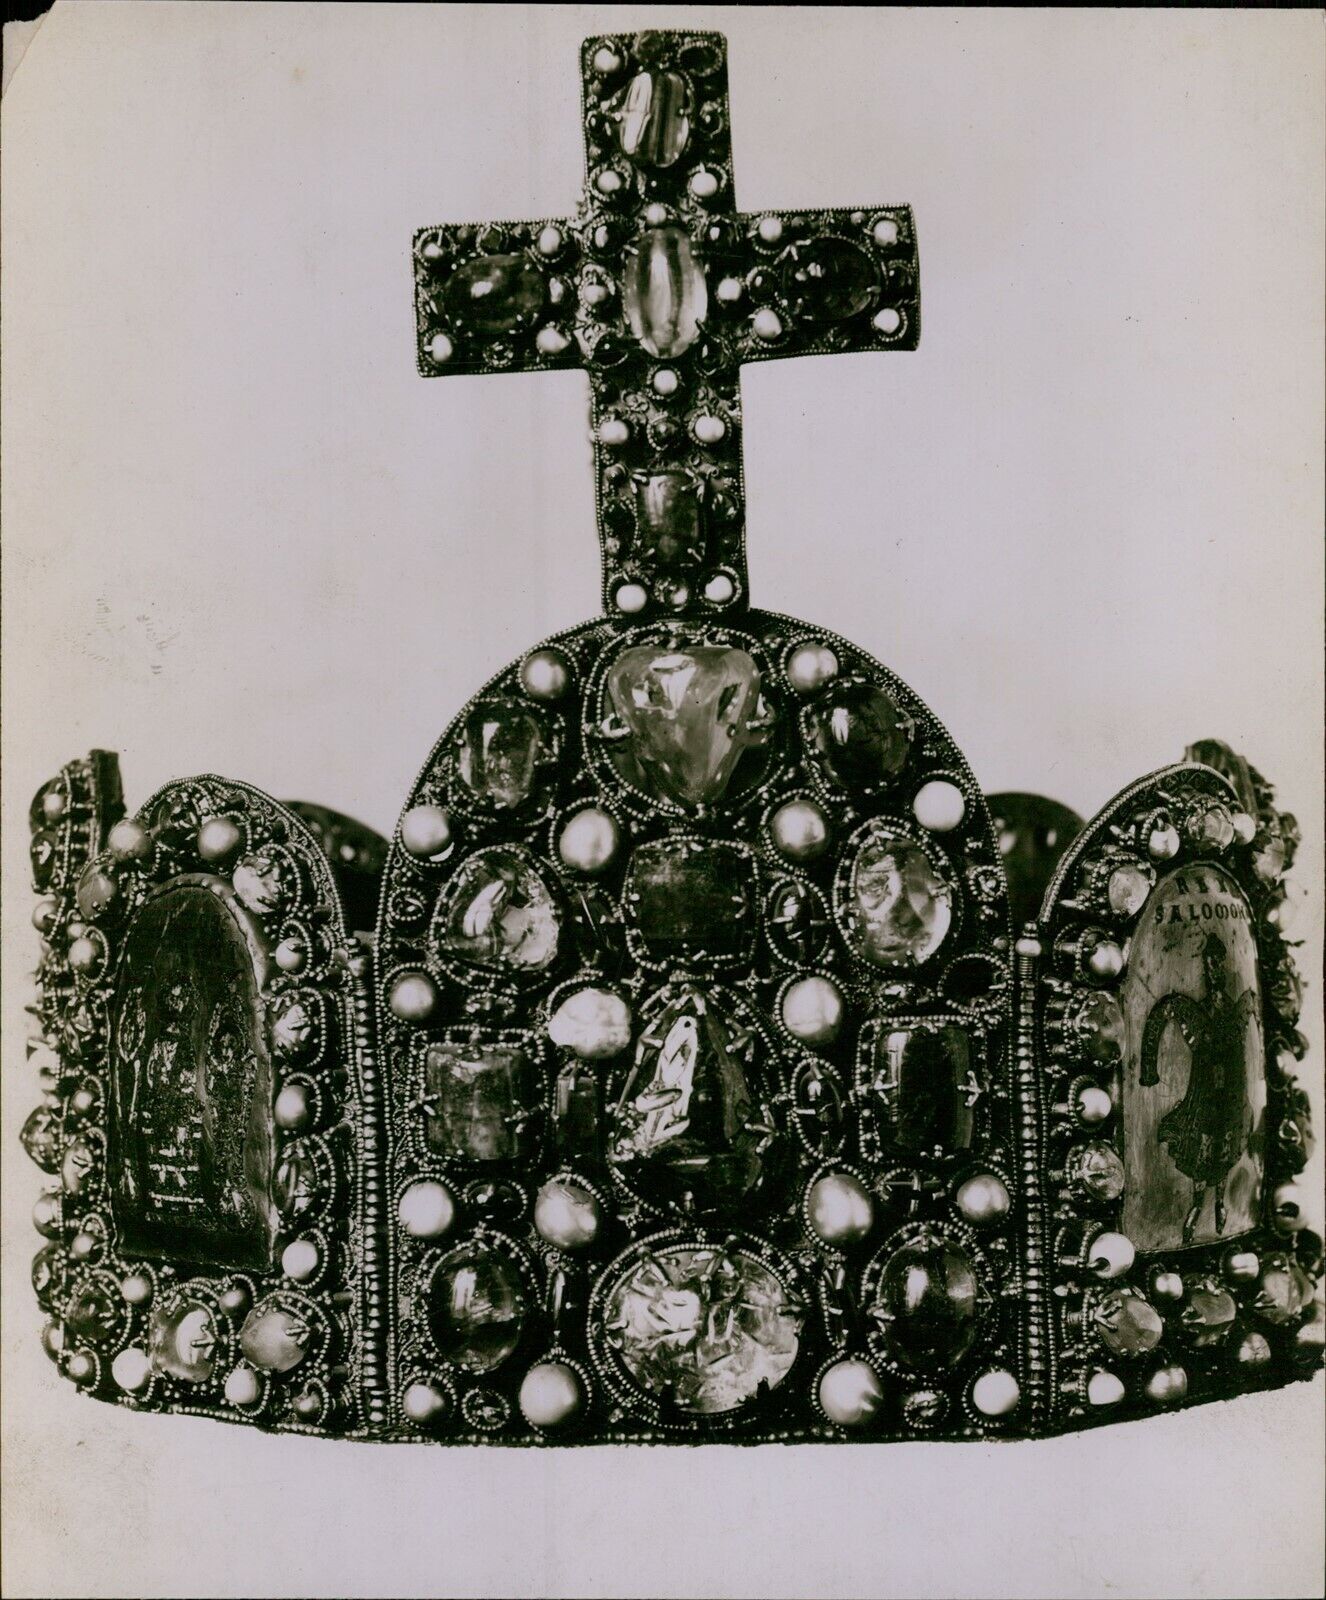 GA43 Original Photo IMPERIAL CROWN OF THE HOLY ROMAN EMPIRE Priceless Jewels